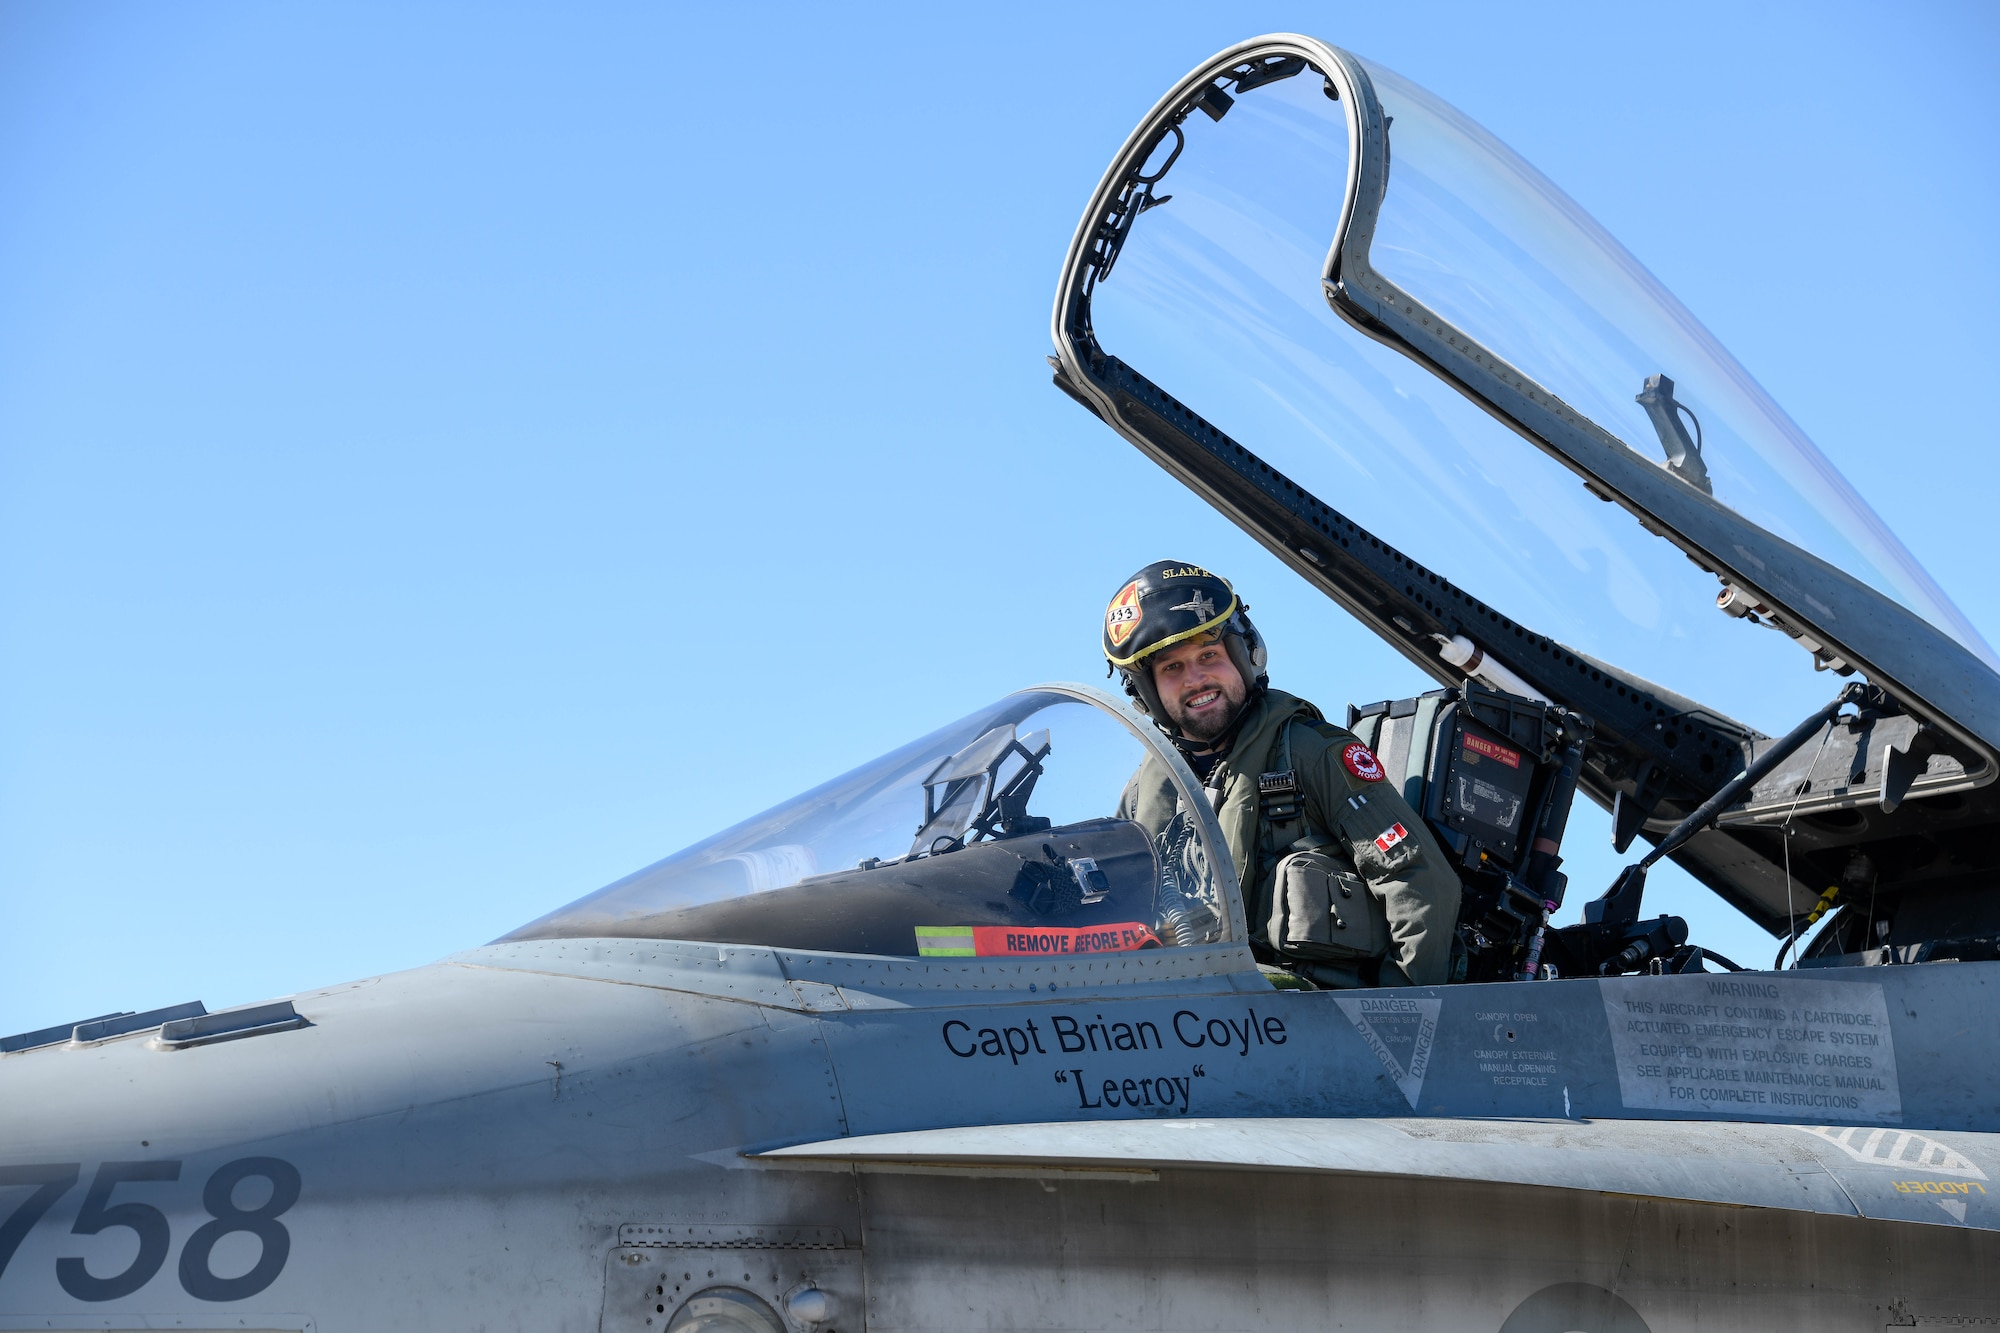 A Royal Canadian air force CF-18 Hornet pilot, assigned to the 433rd Tactical Fighter Squadron in Canadian Forces Base Bagotville, Quebec, Canada, poses for a photo Feb. 25, 2020, at Luke Air Force Base, Ariz.